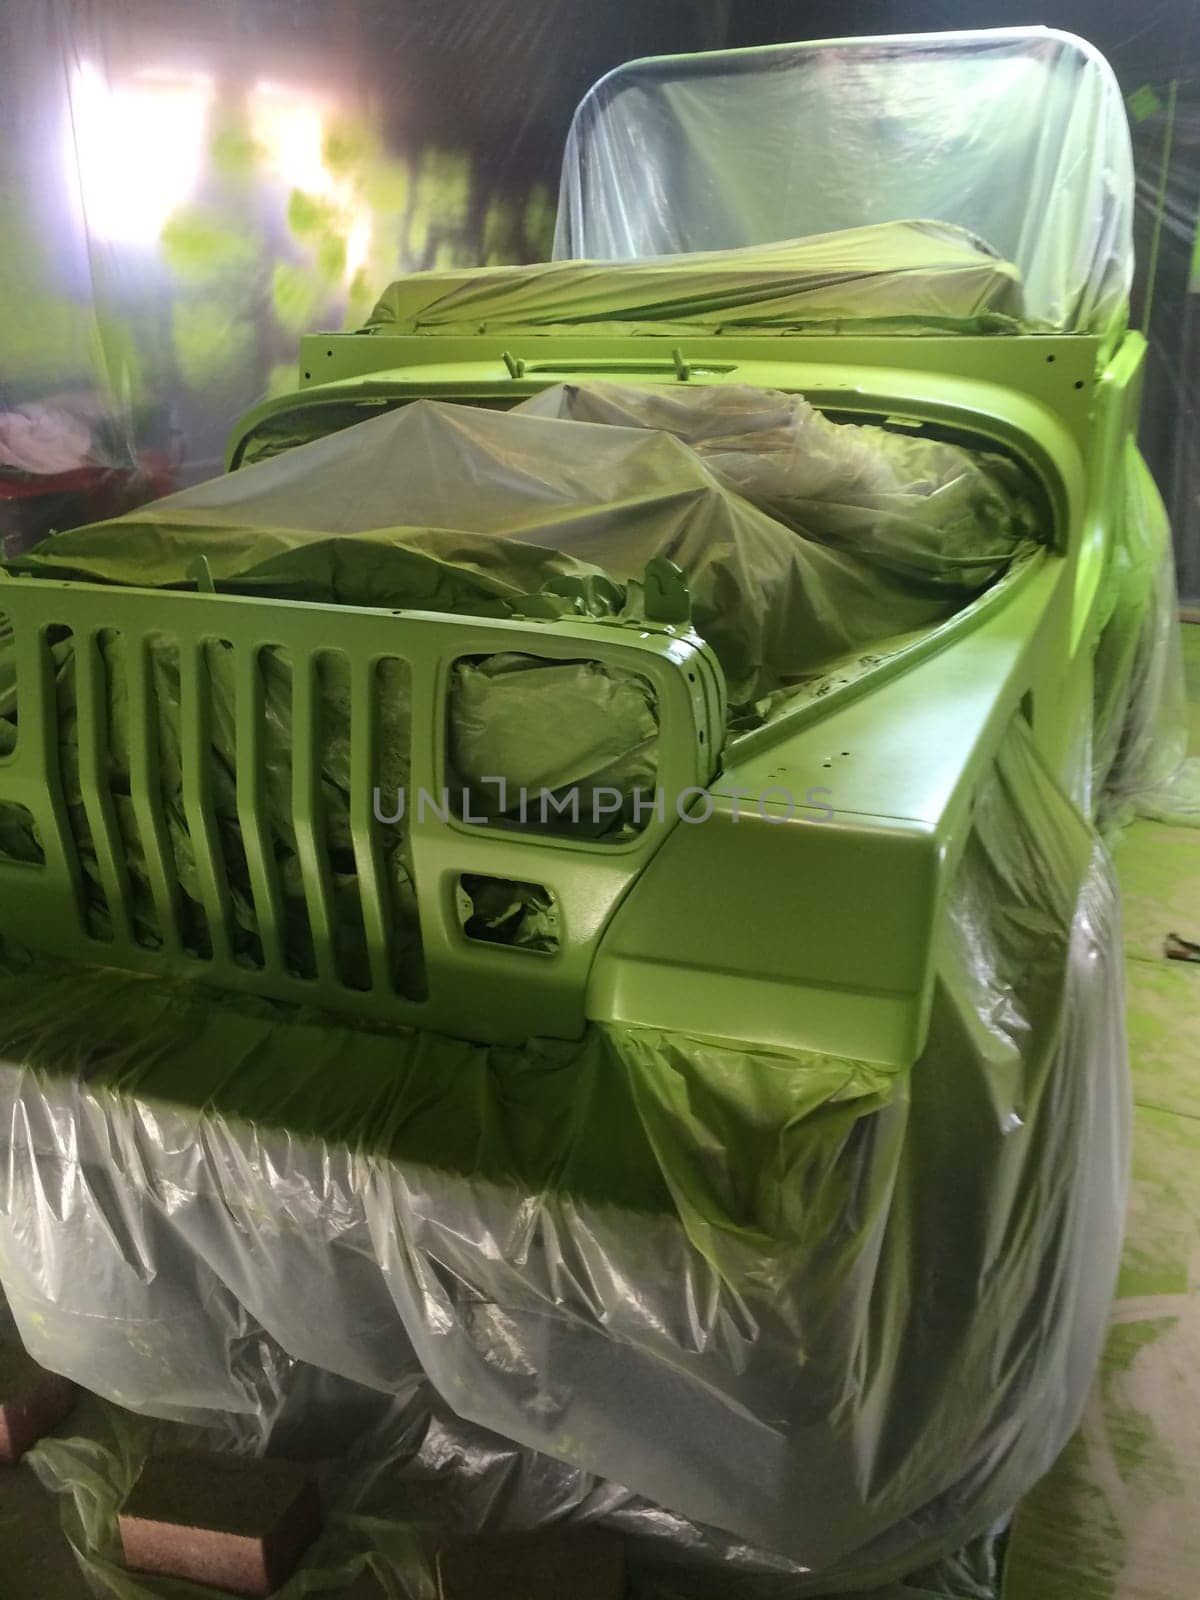 Auto Body Work, Lime Green Paint Job, Square Headlights, 1990s Vehicle . High quality photo